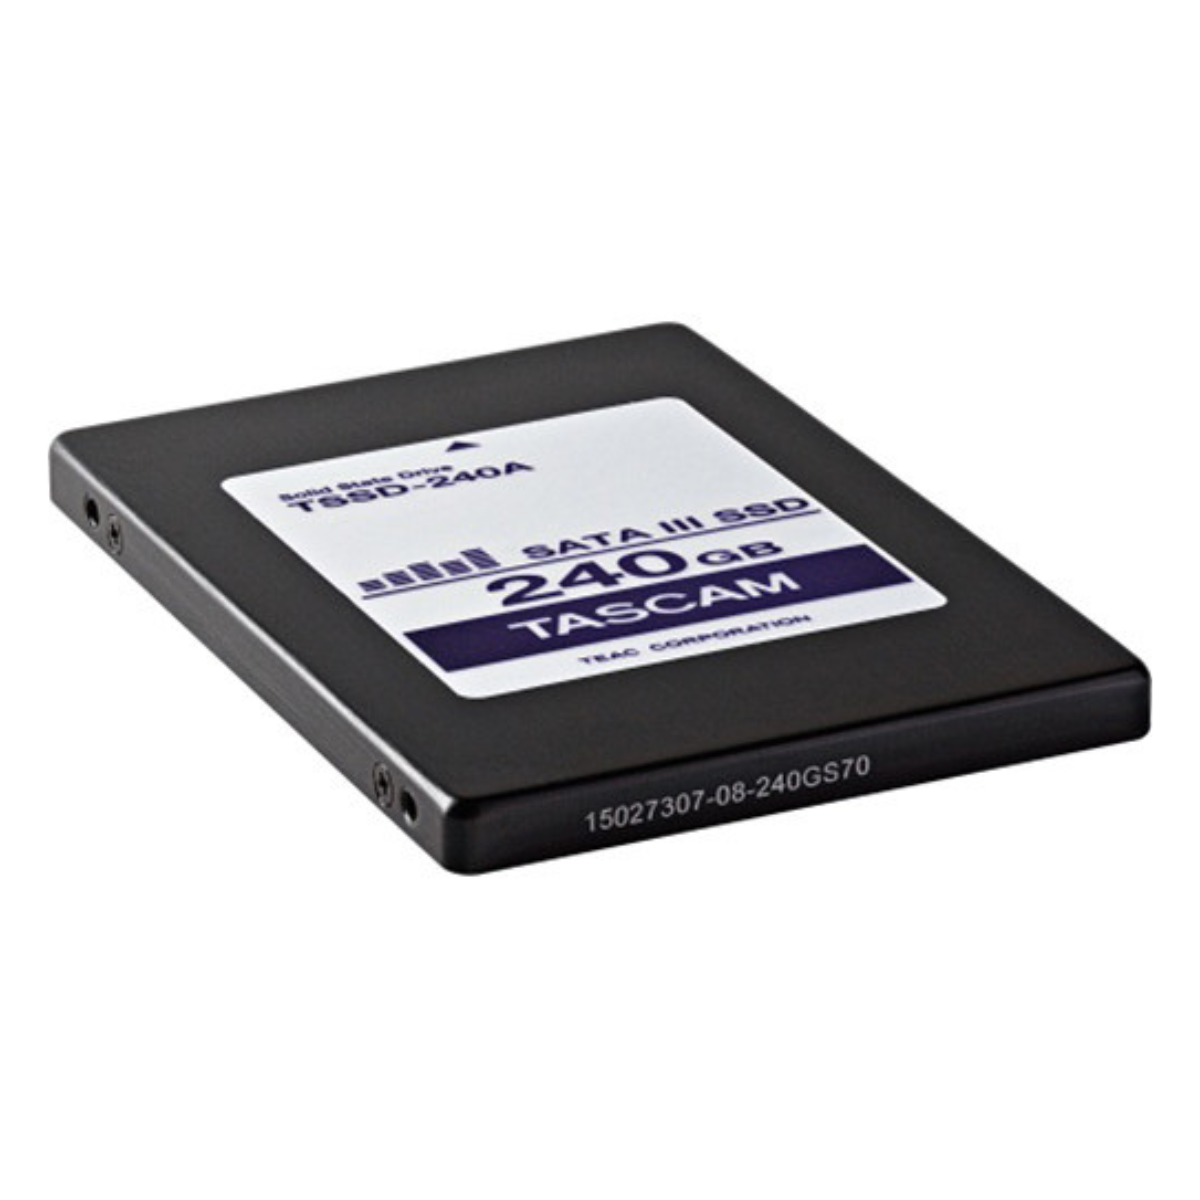 https://www.videoplusfrance.com/381799-product_full/tascam-tssd-240a-disque-ssd-tascam-240-go.jpg